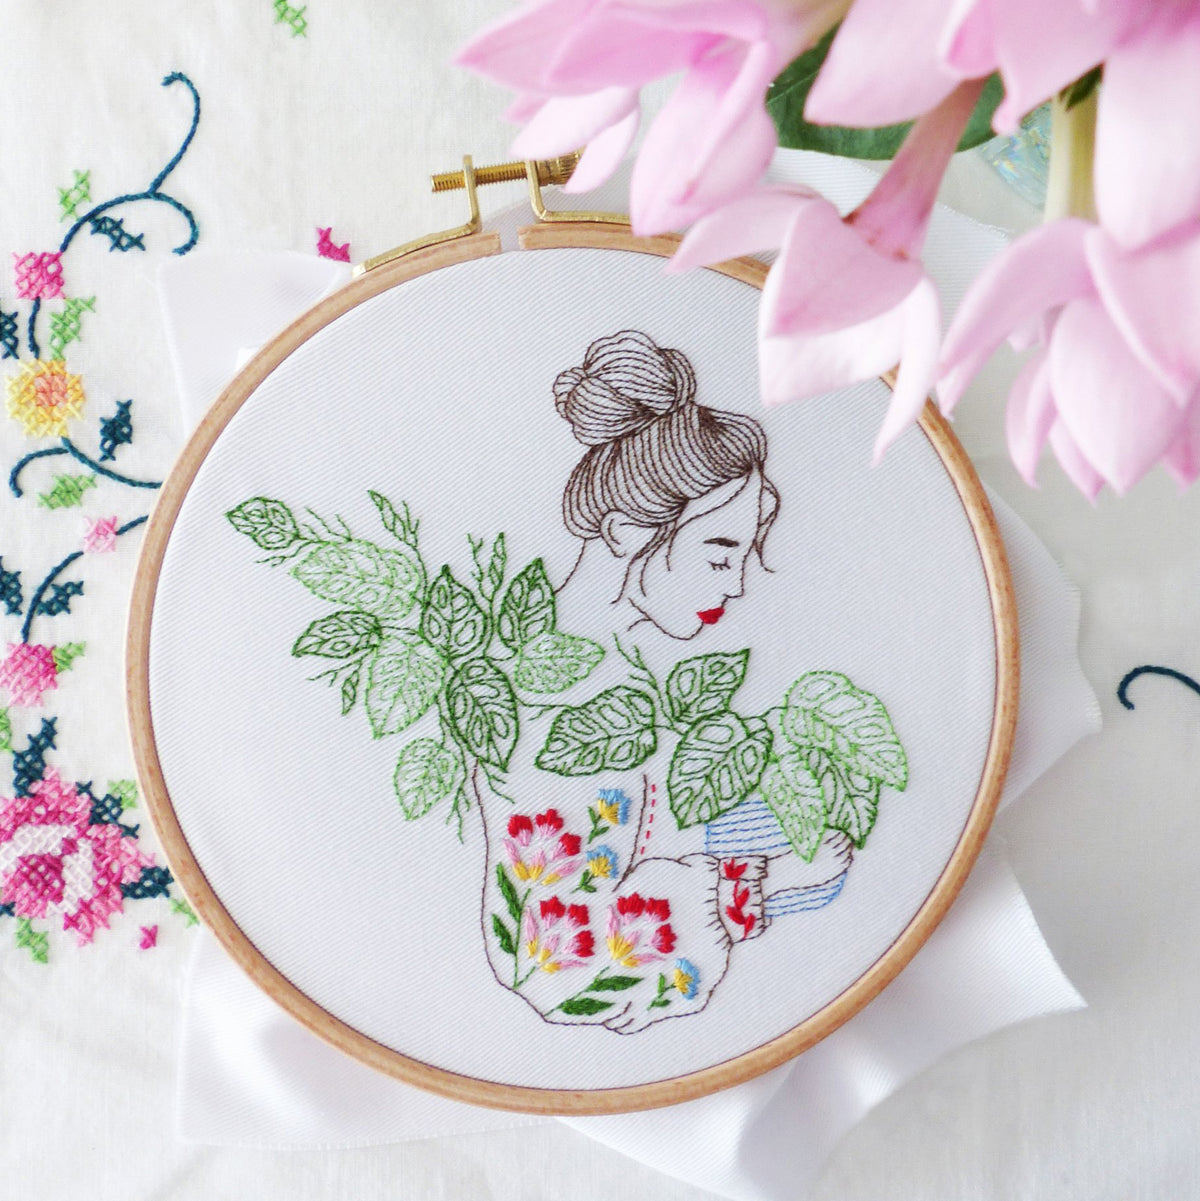 Monstera Lady Hand Embroidery Kit